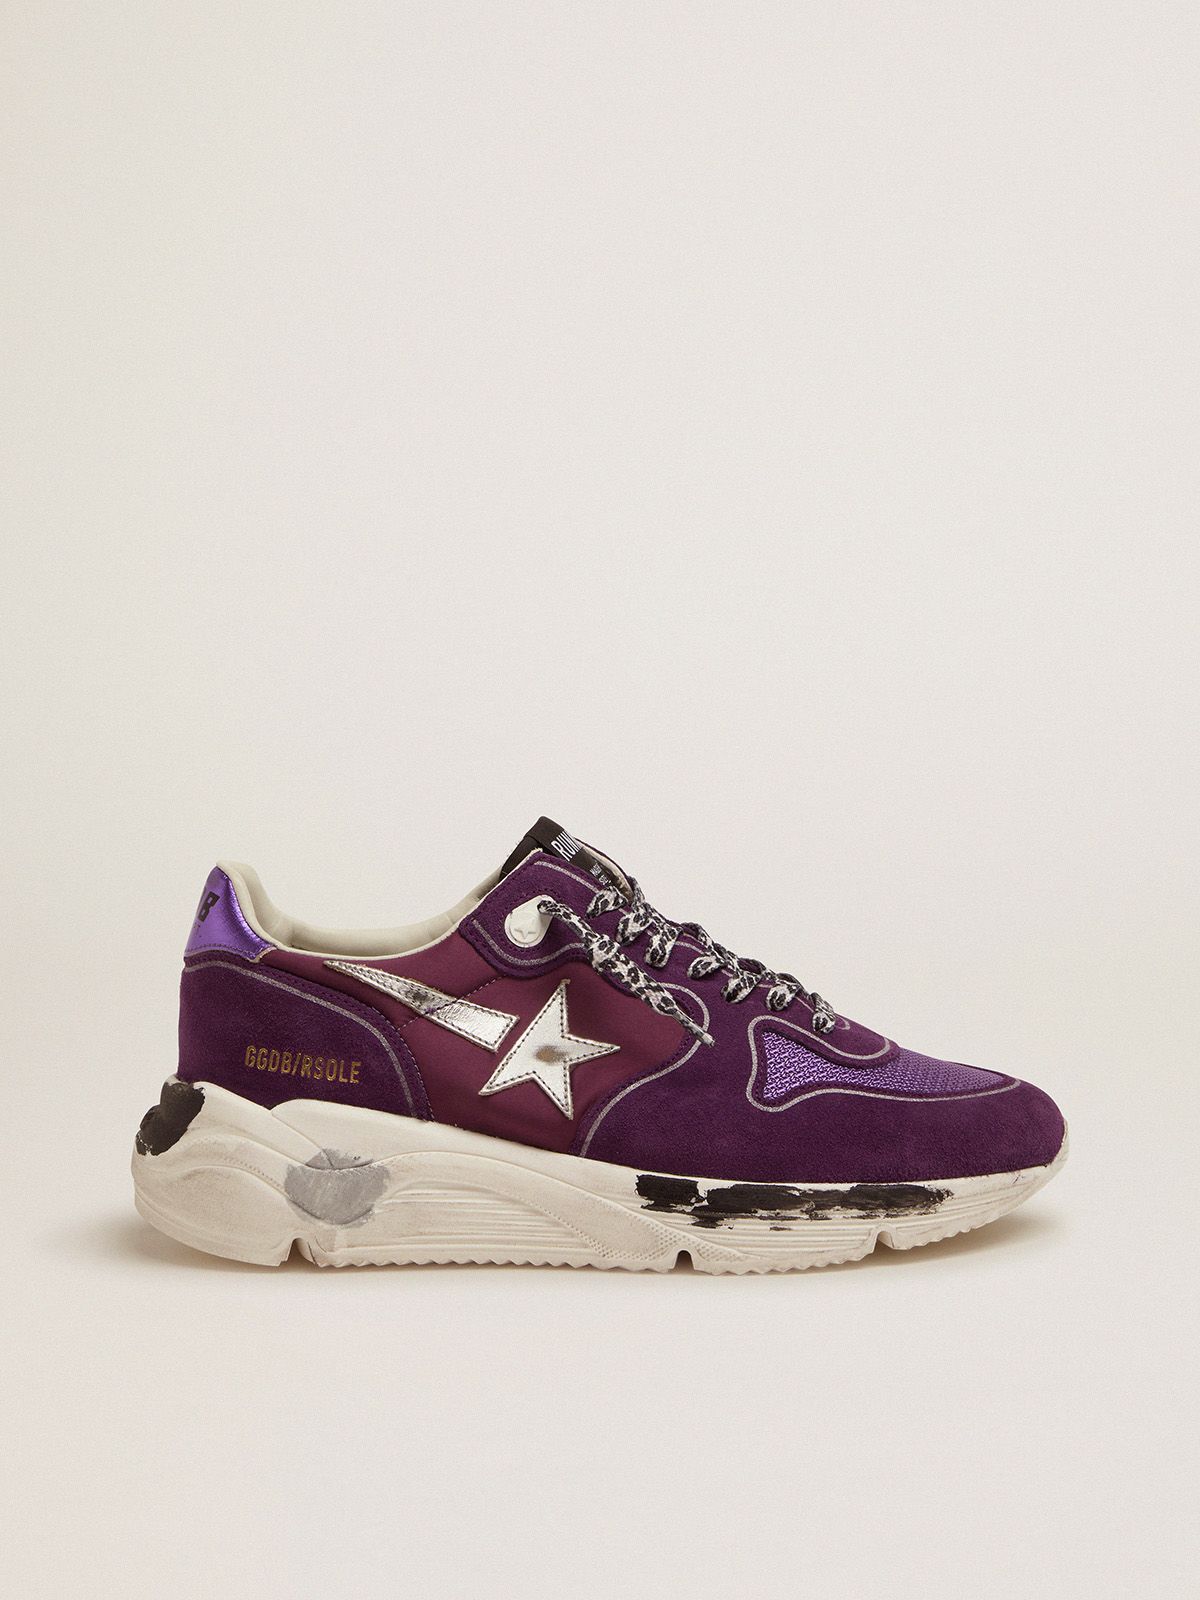 golden goose and with tab metallic sneakers leather heel Sole mesh Suede, purple Running